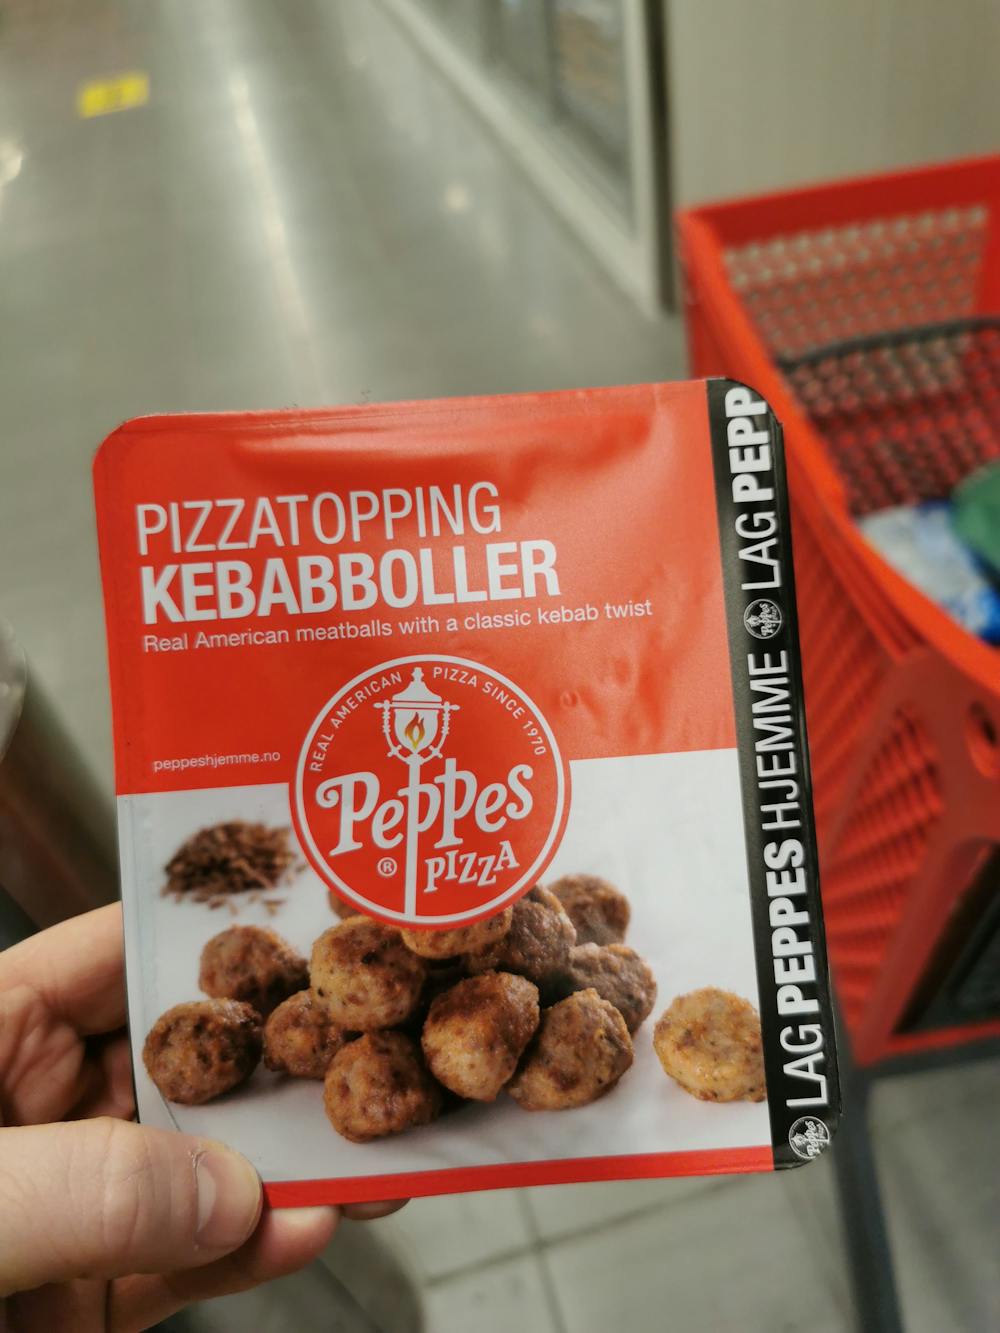 Pizzatopping, kebabboller, Peppes pizza